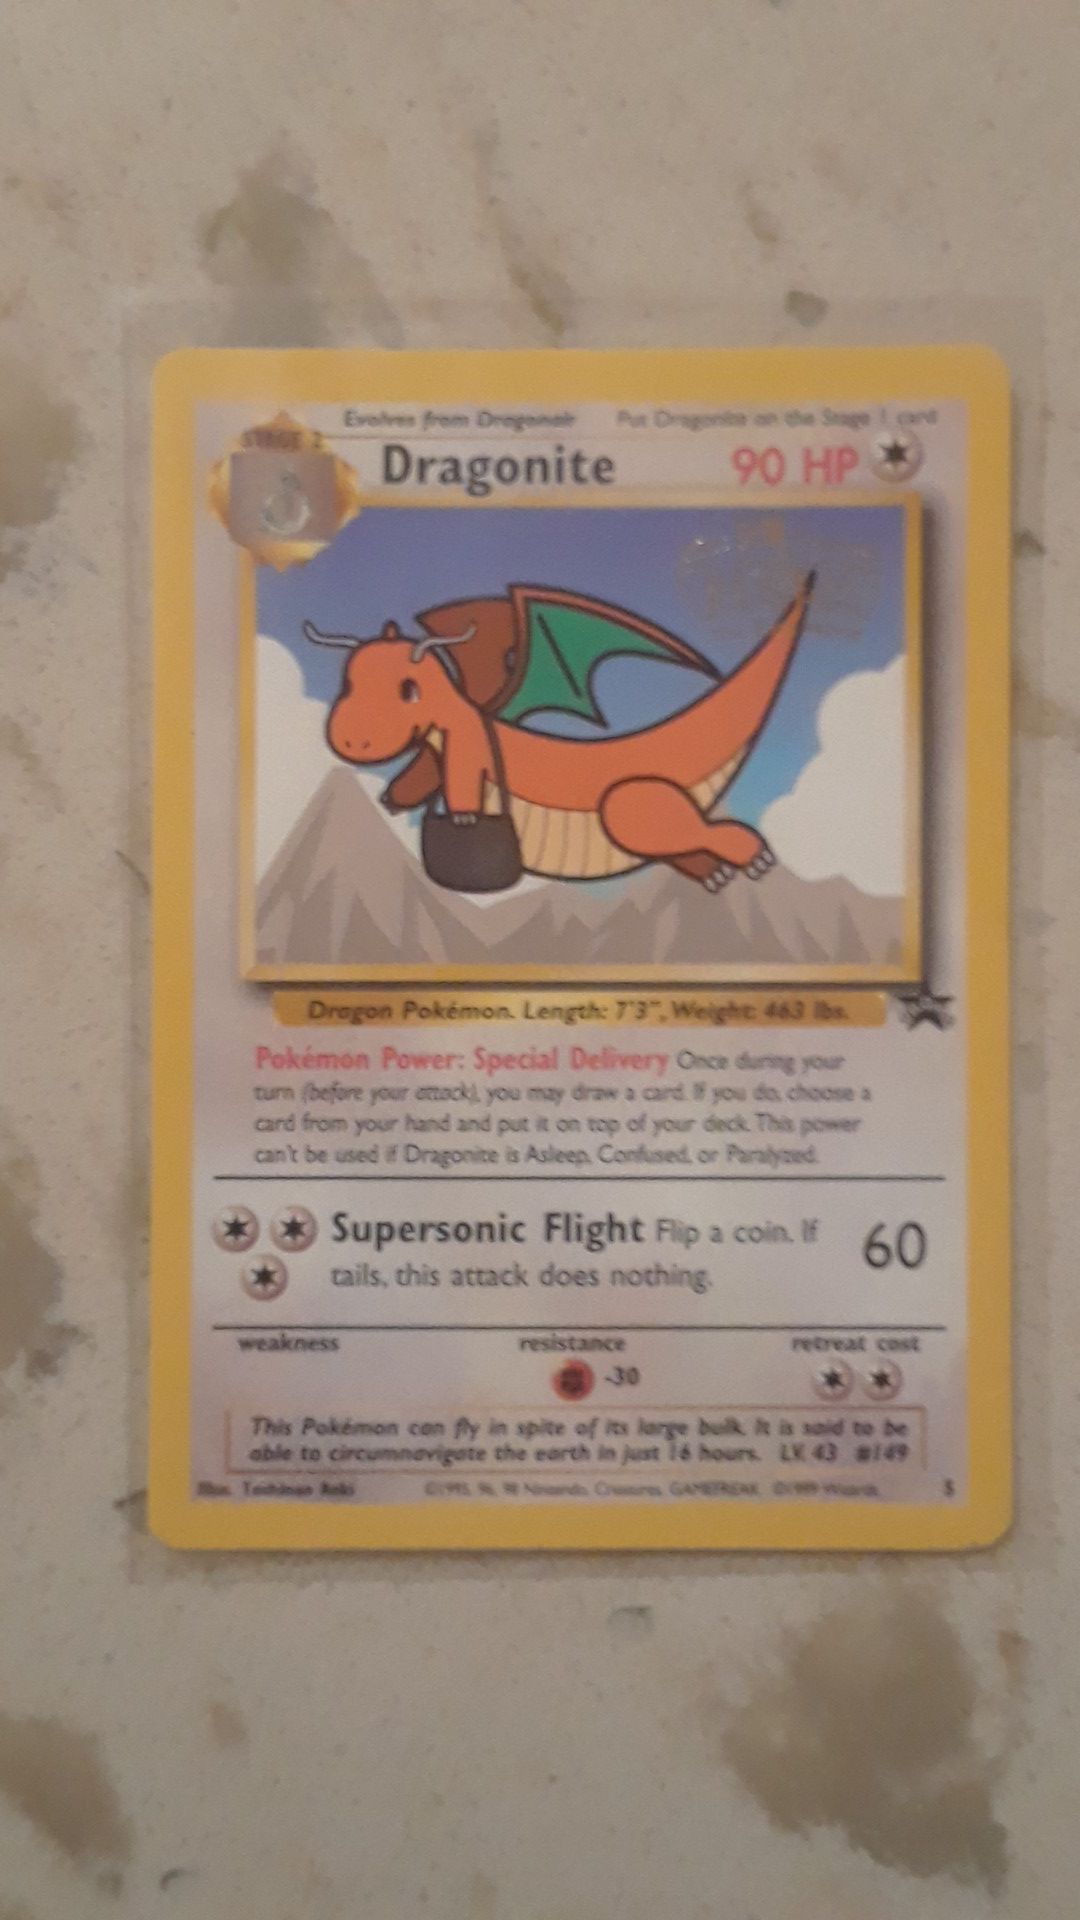 Dragonite Pokemon Card from the first Pokemon movie